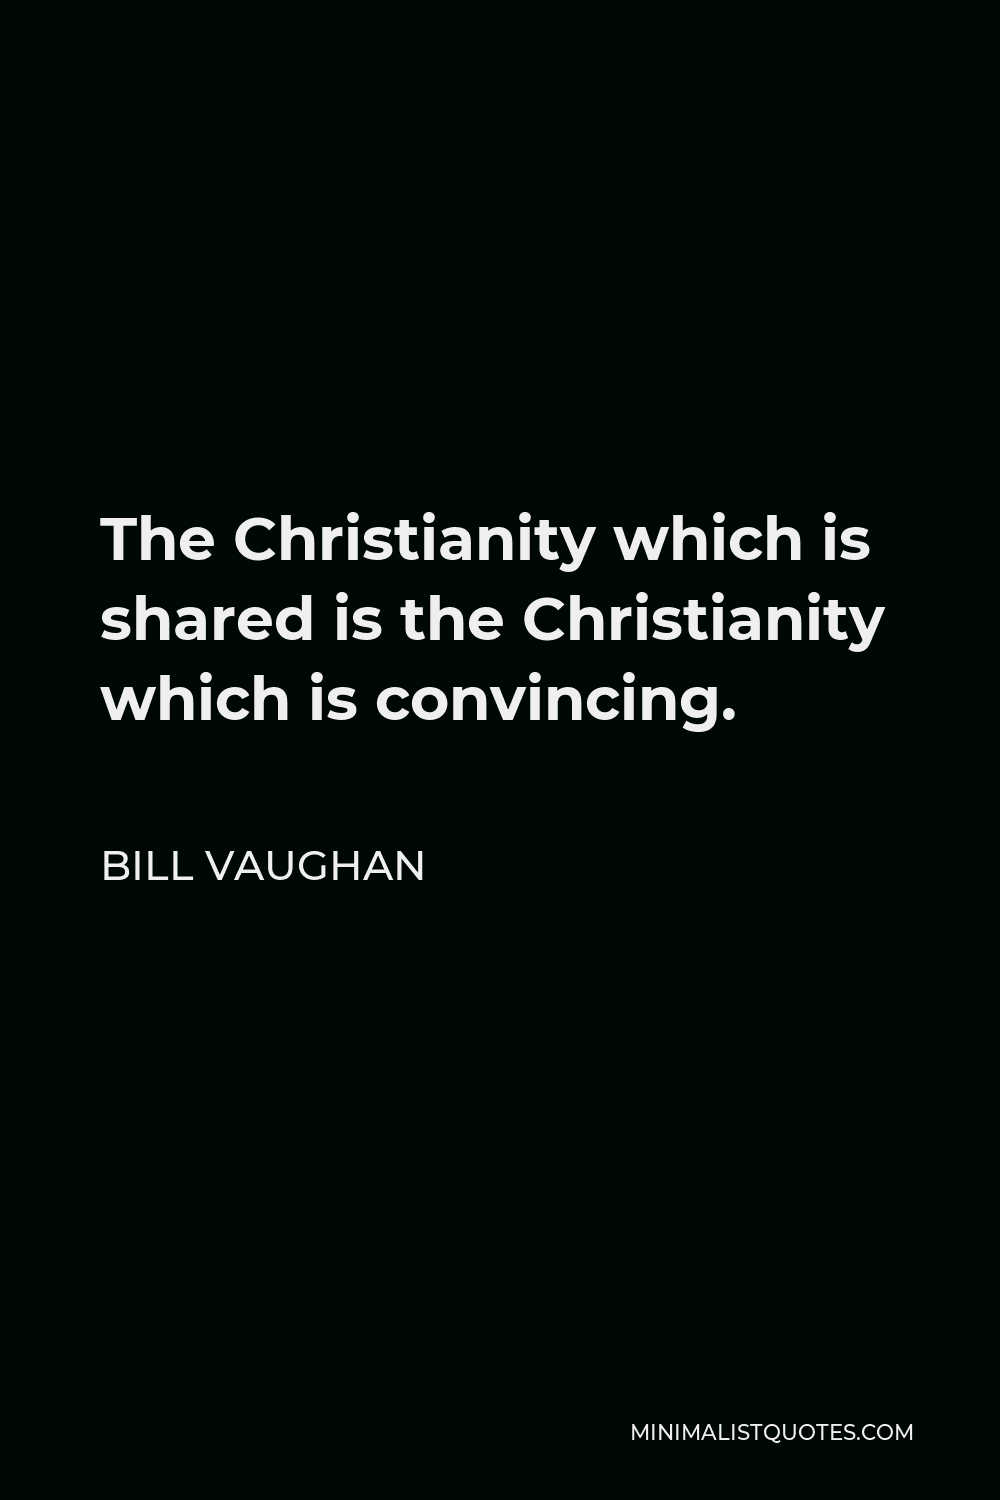 Bill Vaughan Quote - The Christianity which is shared is the Christianity which is convincing.